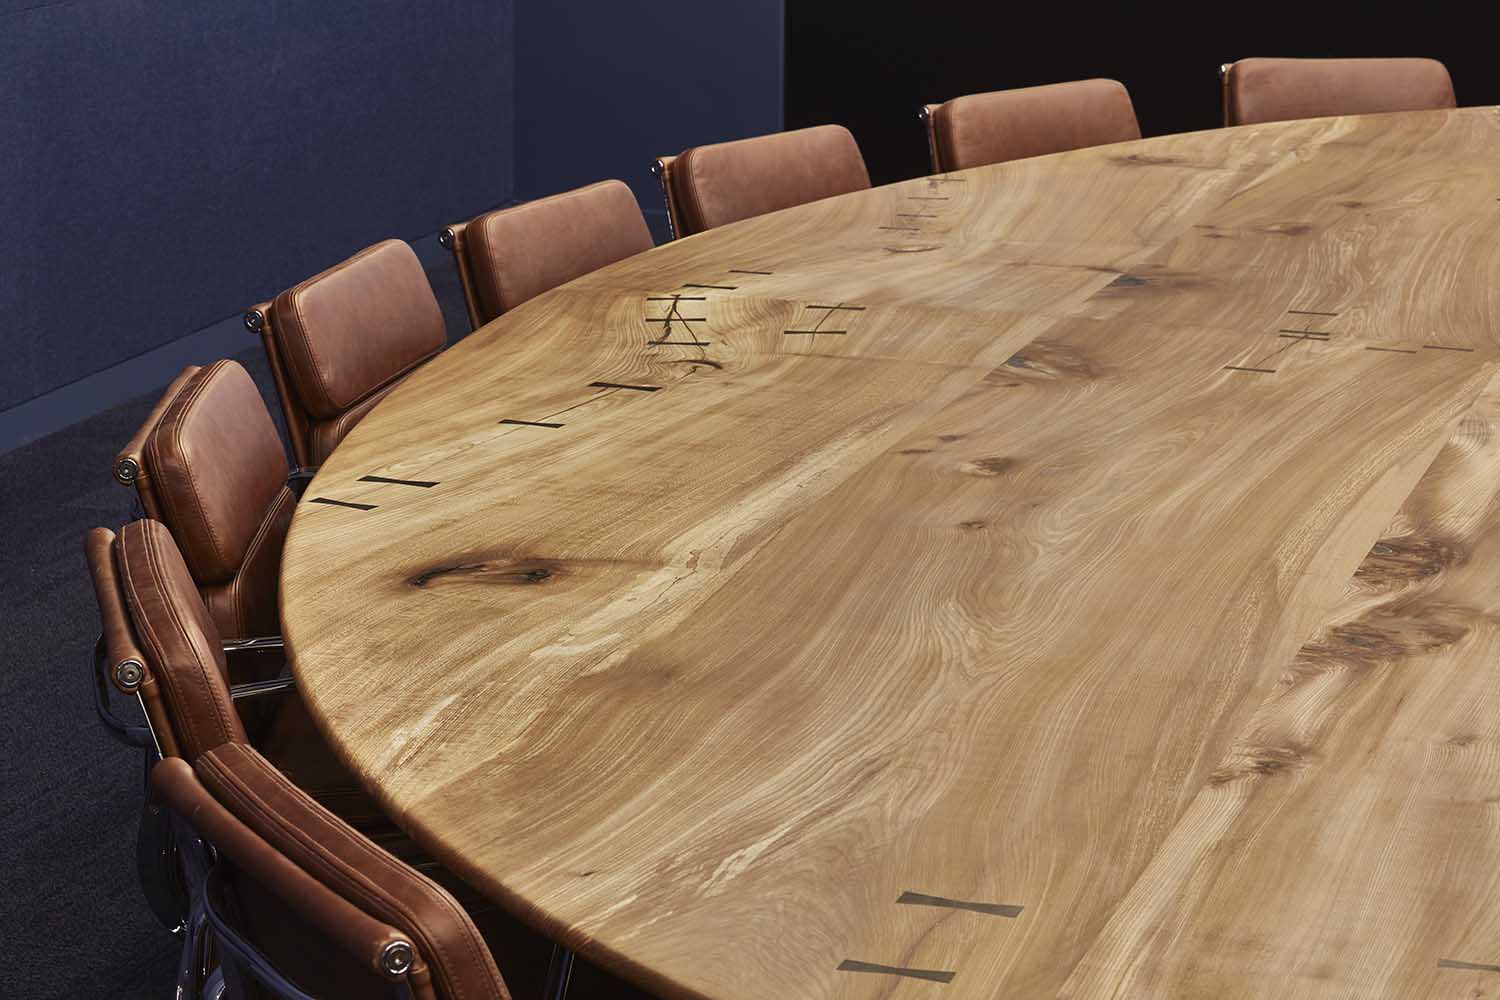 Bespoke eliptical boardroom table made from solid elm with bog oak butterfly ties